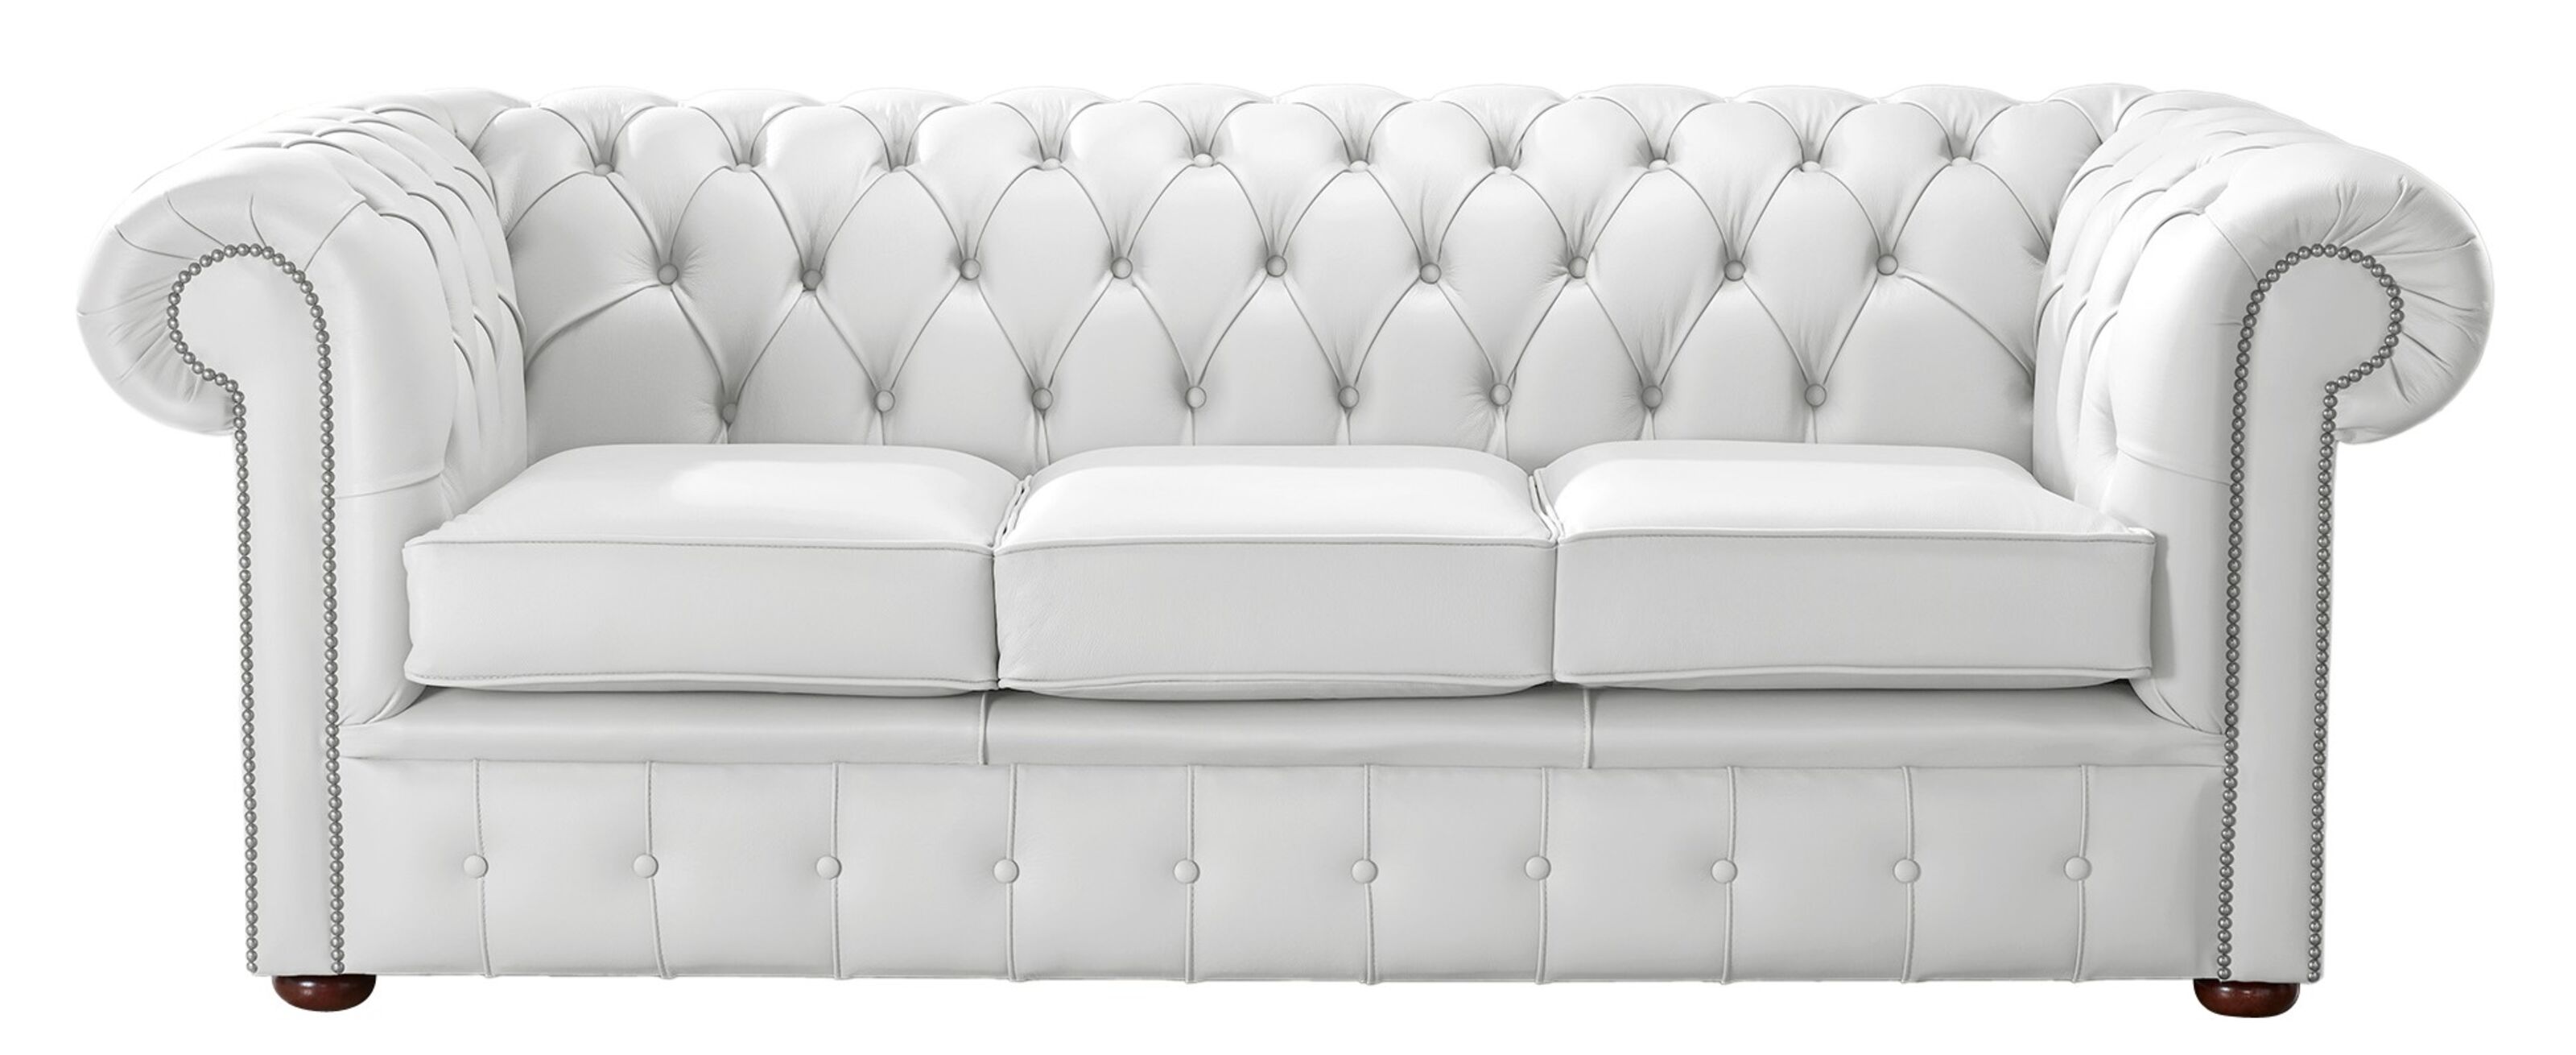 Classic Comfort in Blackburn Chesterfield Sofa Selections  %Post Title